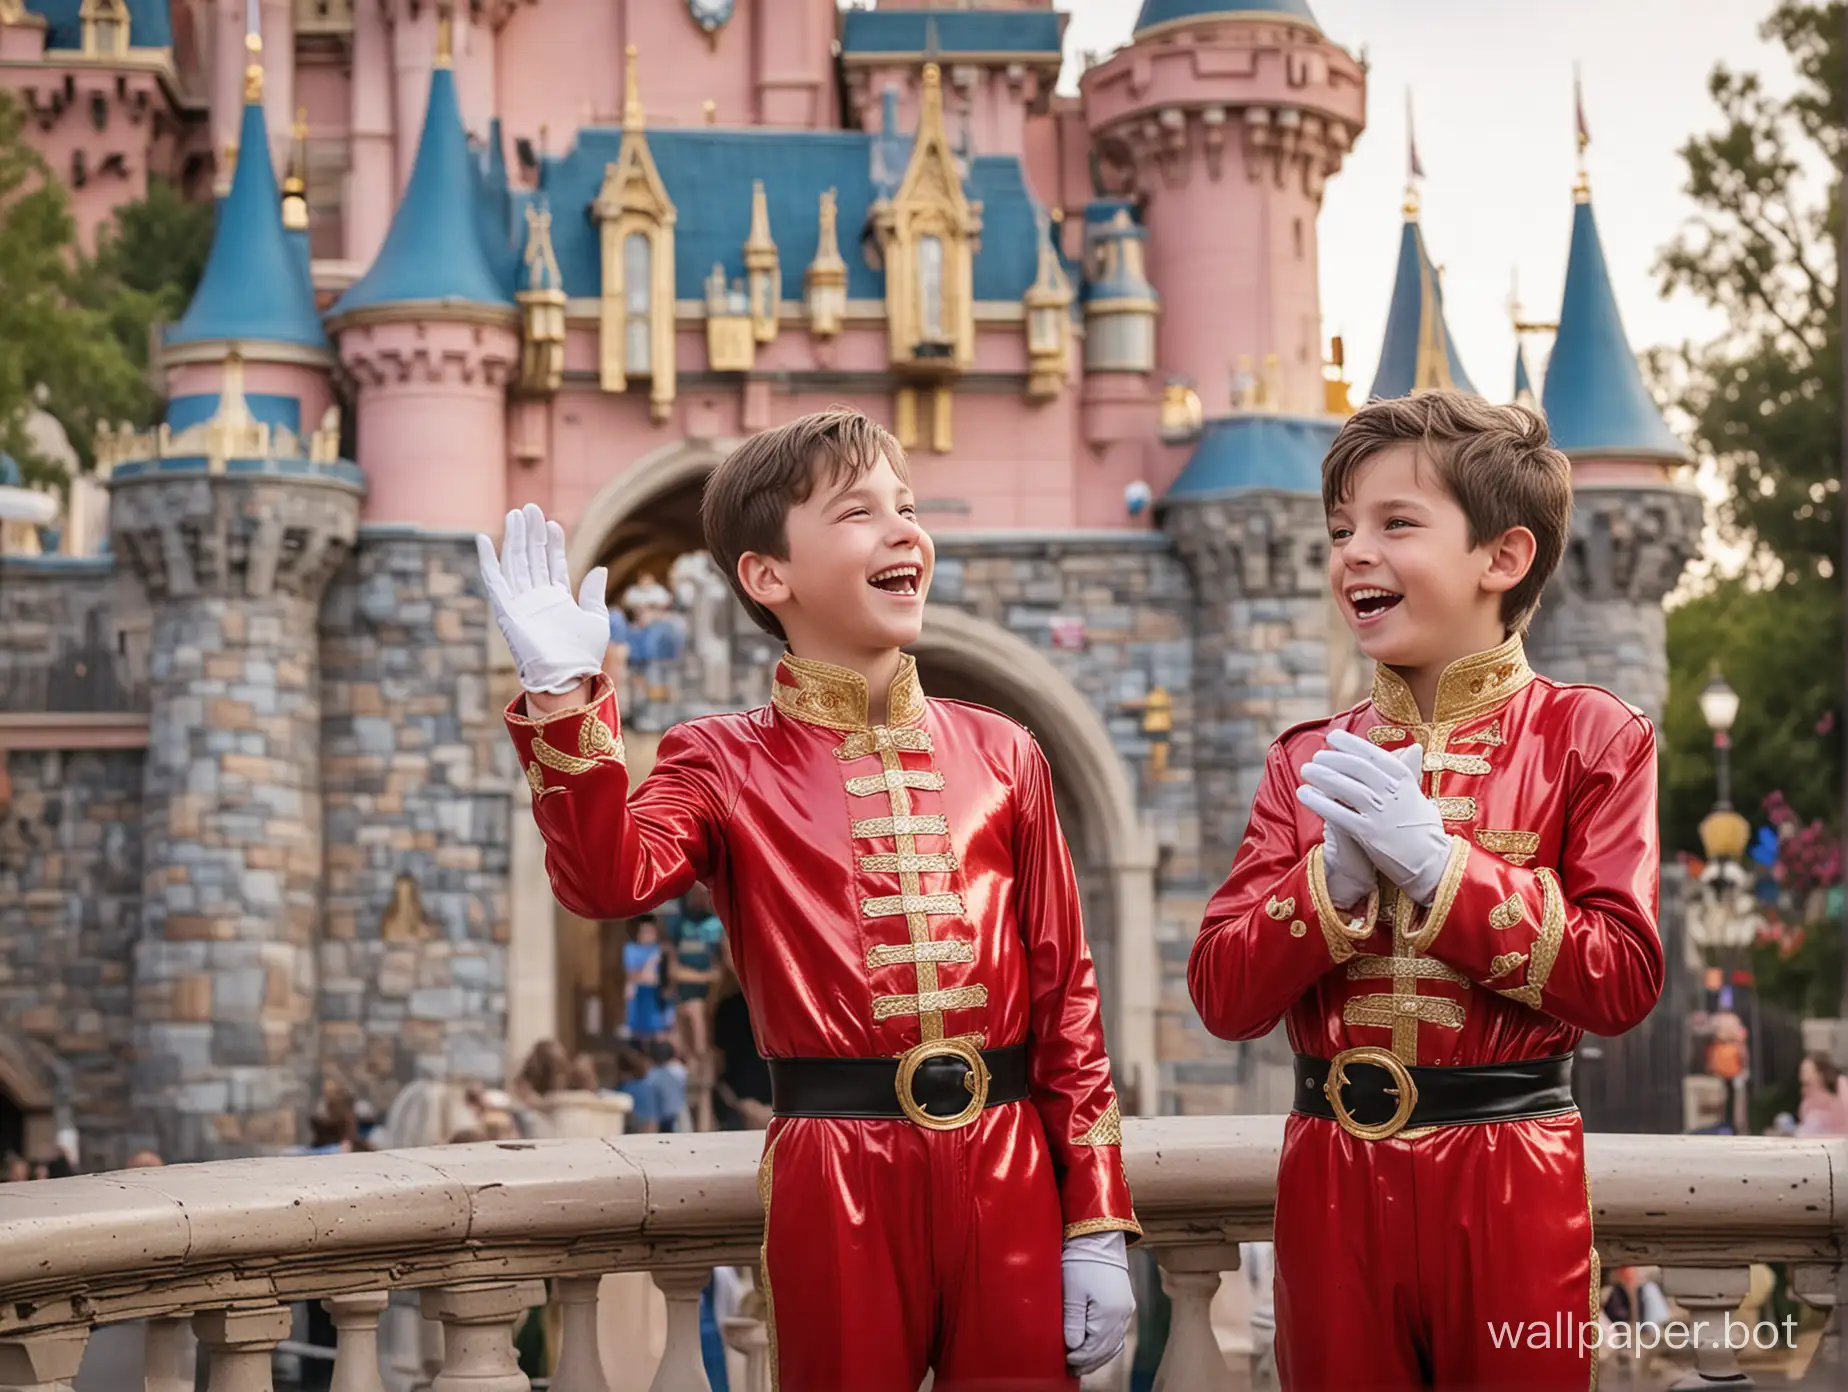 Two 12-year-old boys, each dressed in a latex costume, standing side by side in front of the iconic Sleeping Beauty Castle at Disneyland. They are beaming with excitement and joy, their cheeks flushed from the thrill of being in their favorite place. They are wearing matching latex suits in a vibrant shade of red, accented with white gloves and shoes. Their heads are thrown back, their arms raised in the air, revealing their smooth, latex-covered skin. One of the boys has his hands clasped together, as if in prayer, while the other stretches his arms out wide, embracing the moment. Despite being surrounded by the hustle and bustle of the theme park, these two boys seem to be lost in their own world, fully immersed in the magic and wonder of Disneyland. Their eyes meet, and they can't help but grin and laugh, sharing a private joke only they understand. The image captures the essence of childhood innocence, the freedom to express oneself fully, and the unbridled joy of being in a place where dreams come true.